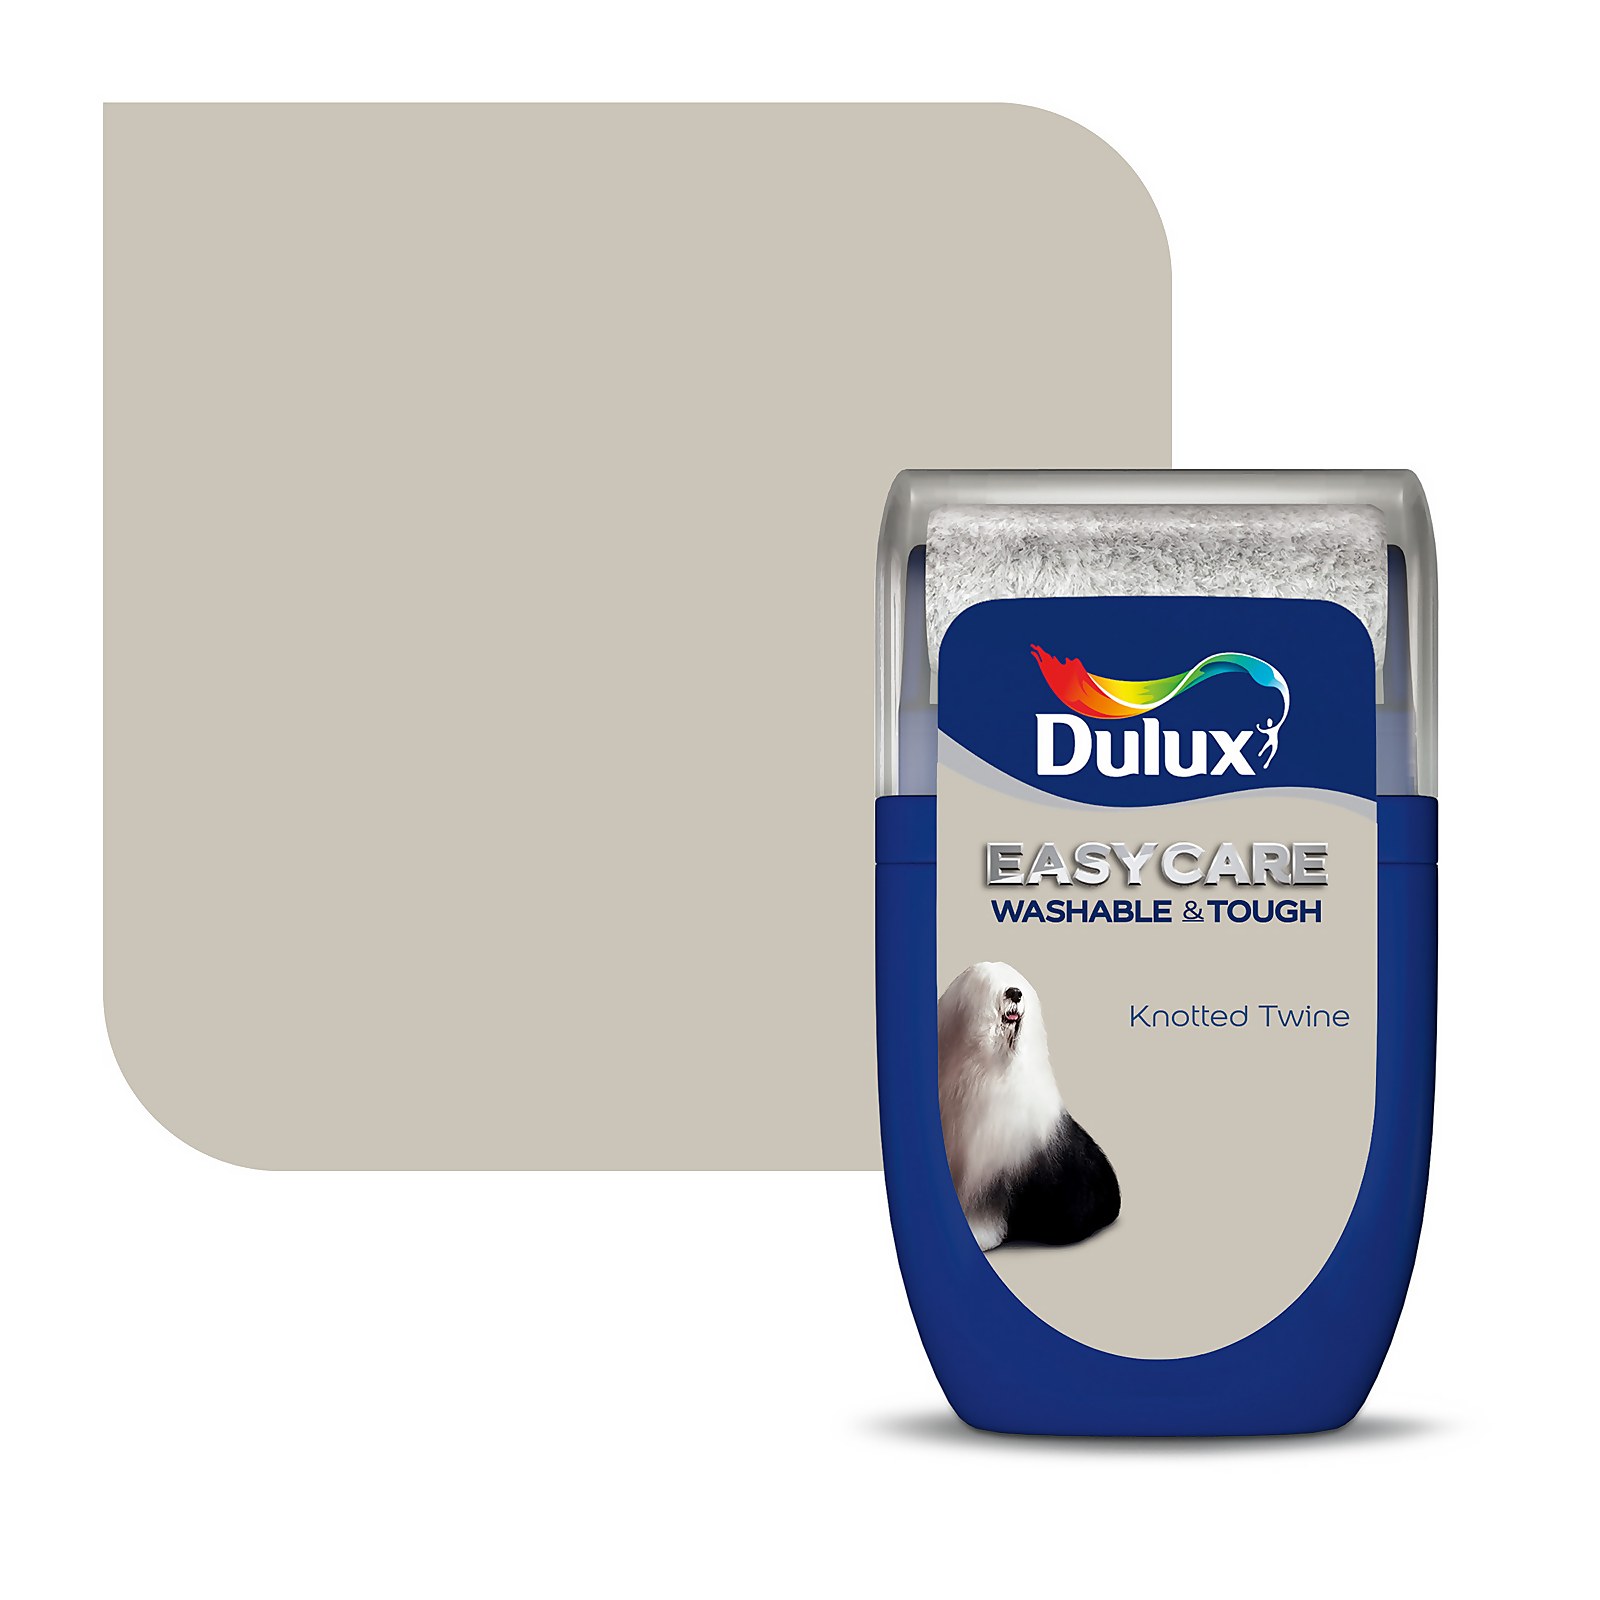 Dulux Easycare Washable & Tough Paint Knotted Twine - Tester 30ml